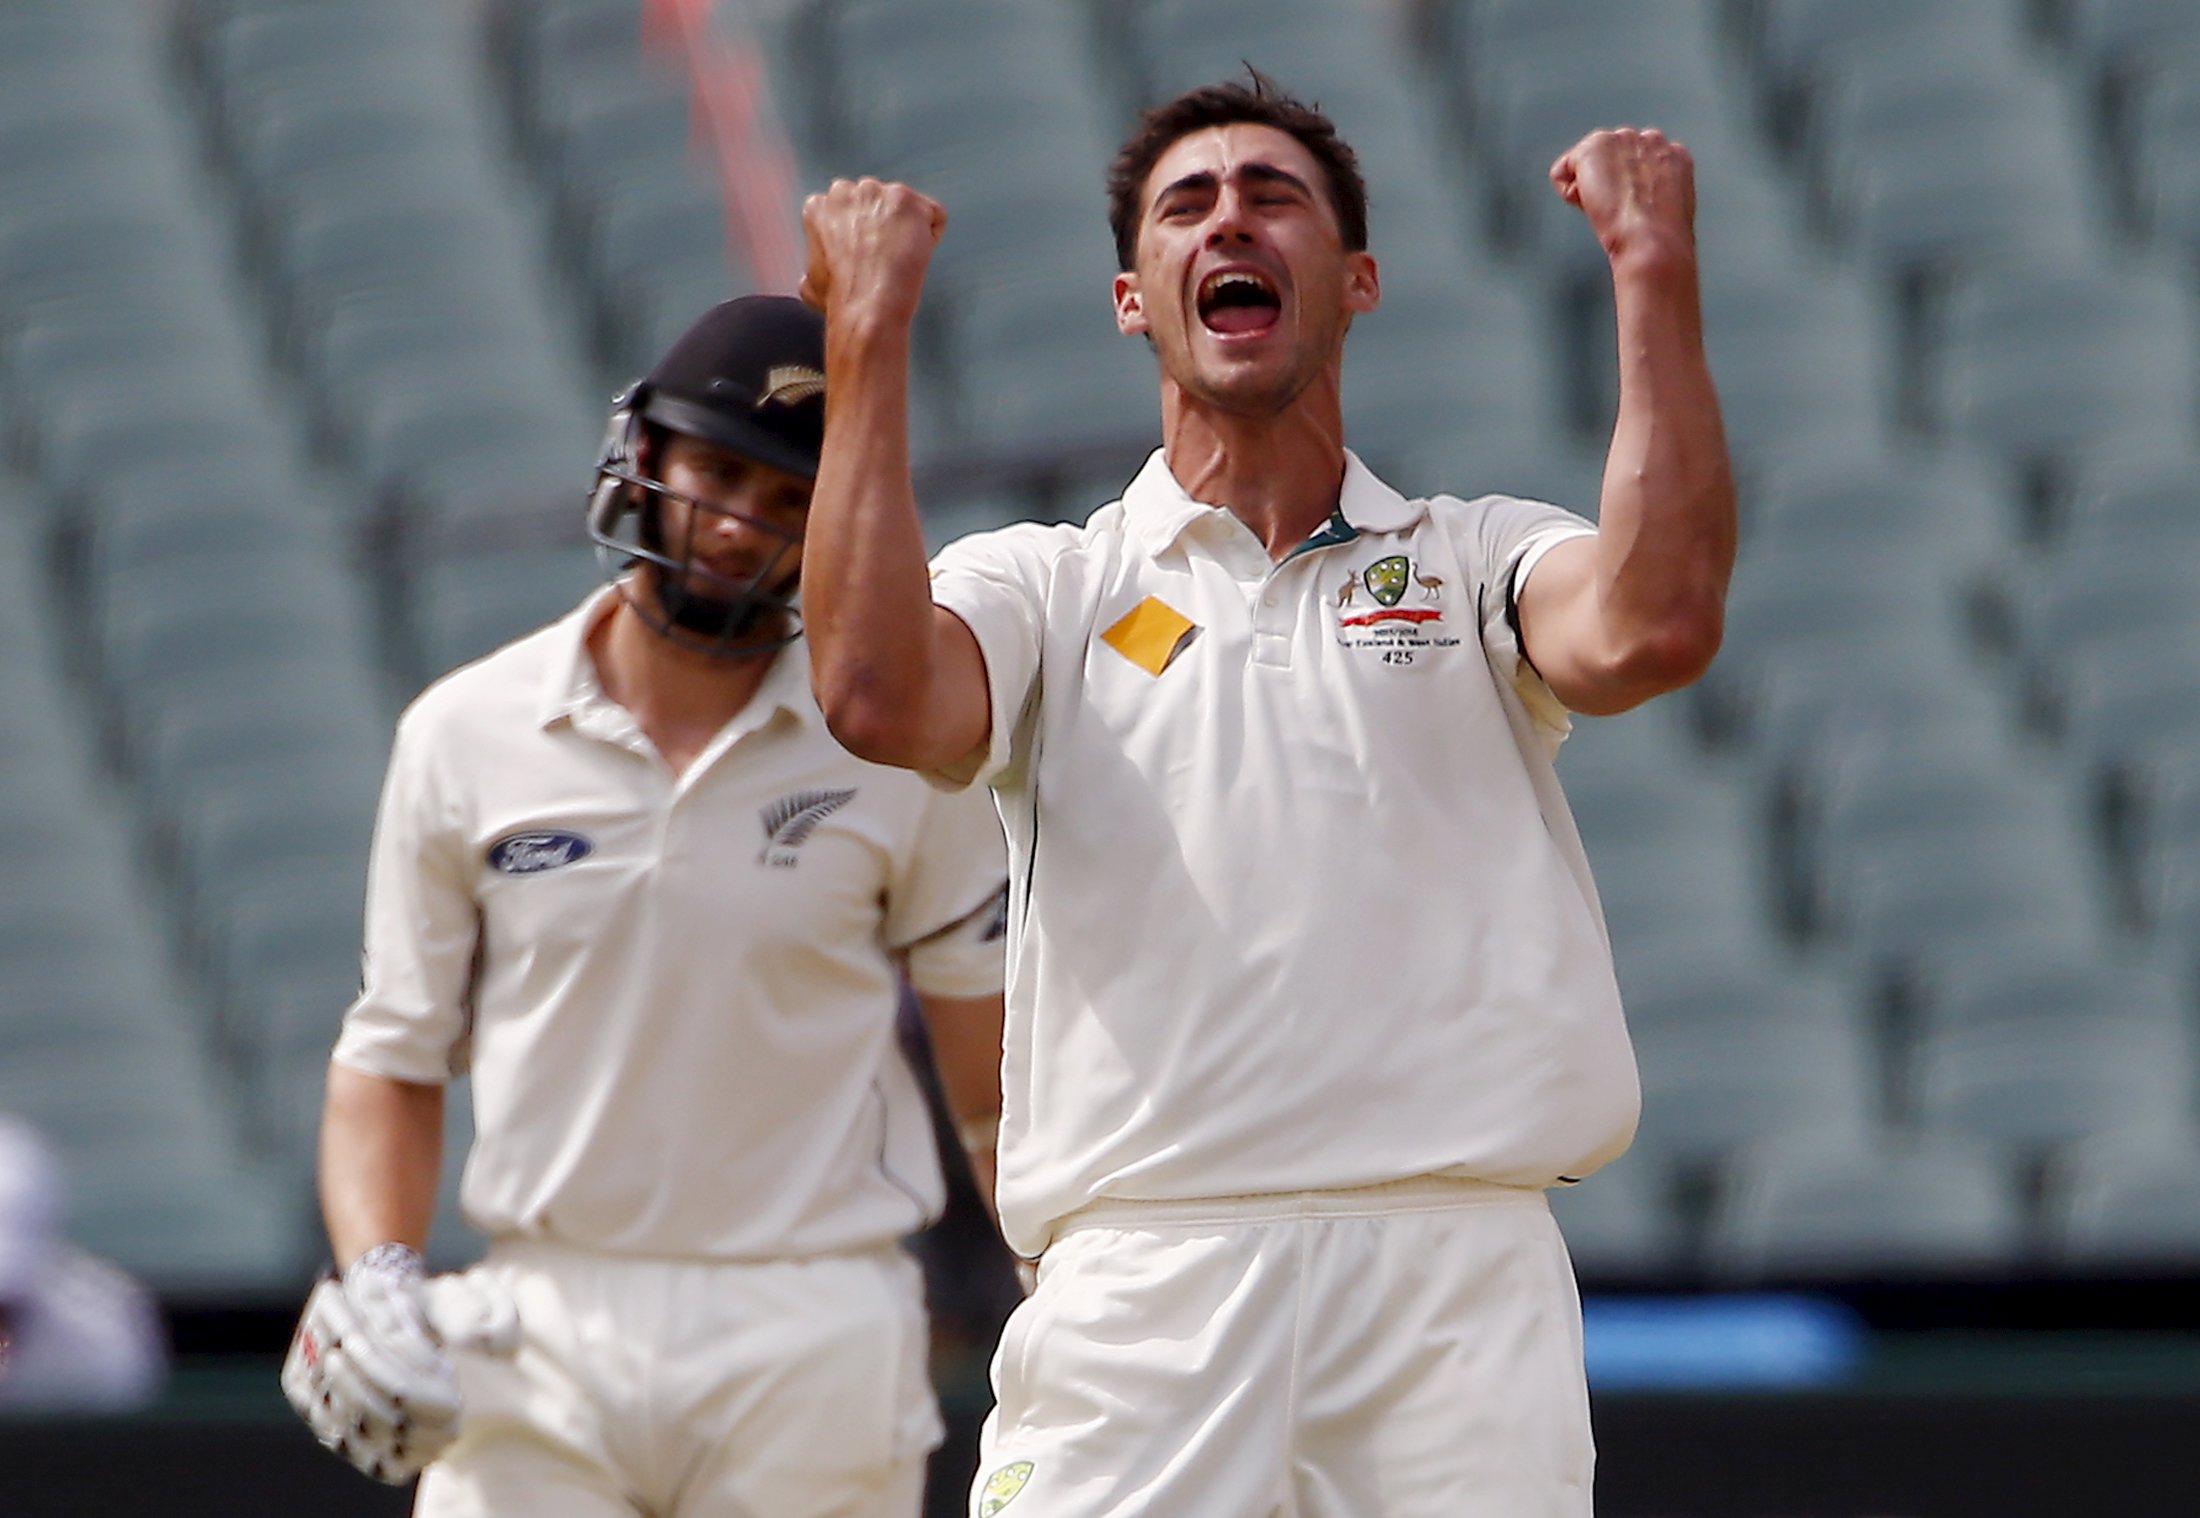 Australia's Mitchell Starc (R) celebrates dismissing New Zealand's Kane Williamson LBW for 22 runs during the first day of the third cricket test match at the Adelaide Oval, in South Australia, November 27, 2015.    REUTERS/David Gray